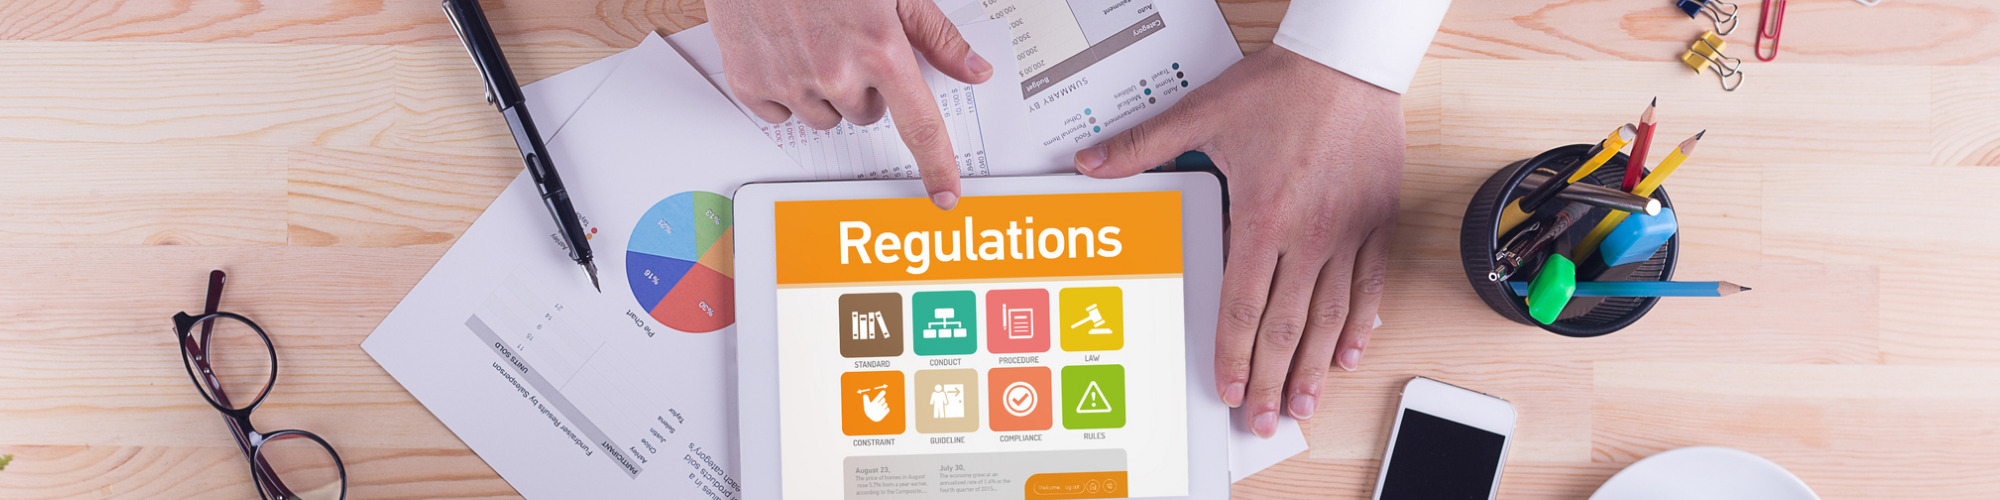 An Introduction to the Regulation of Charities - The Legal & Regulatory Framework Explained